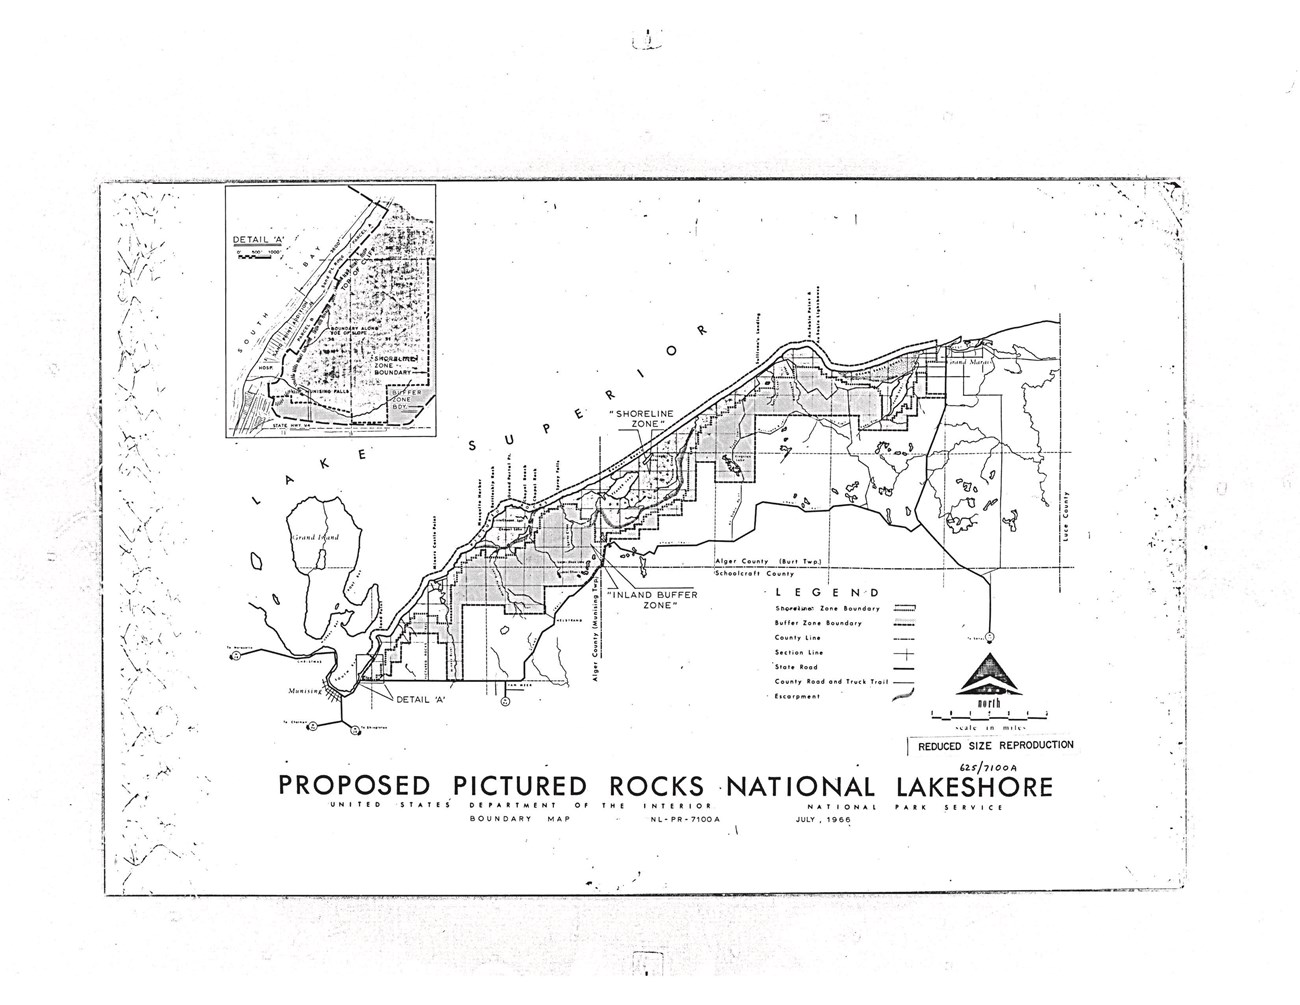 Boundary Map of the proposed Pictured Rocks National Lakeshore July 1966. For a detailed description please call 906-387-2607.